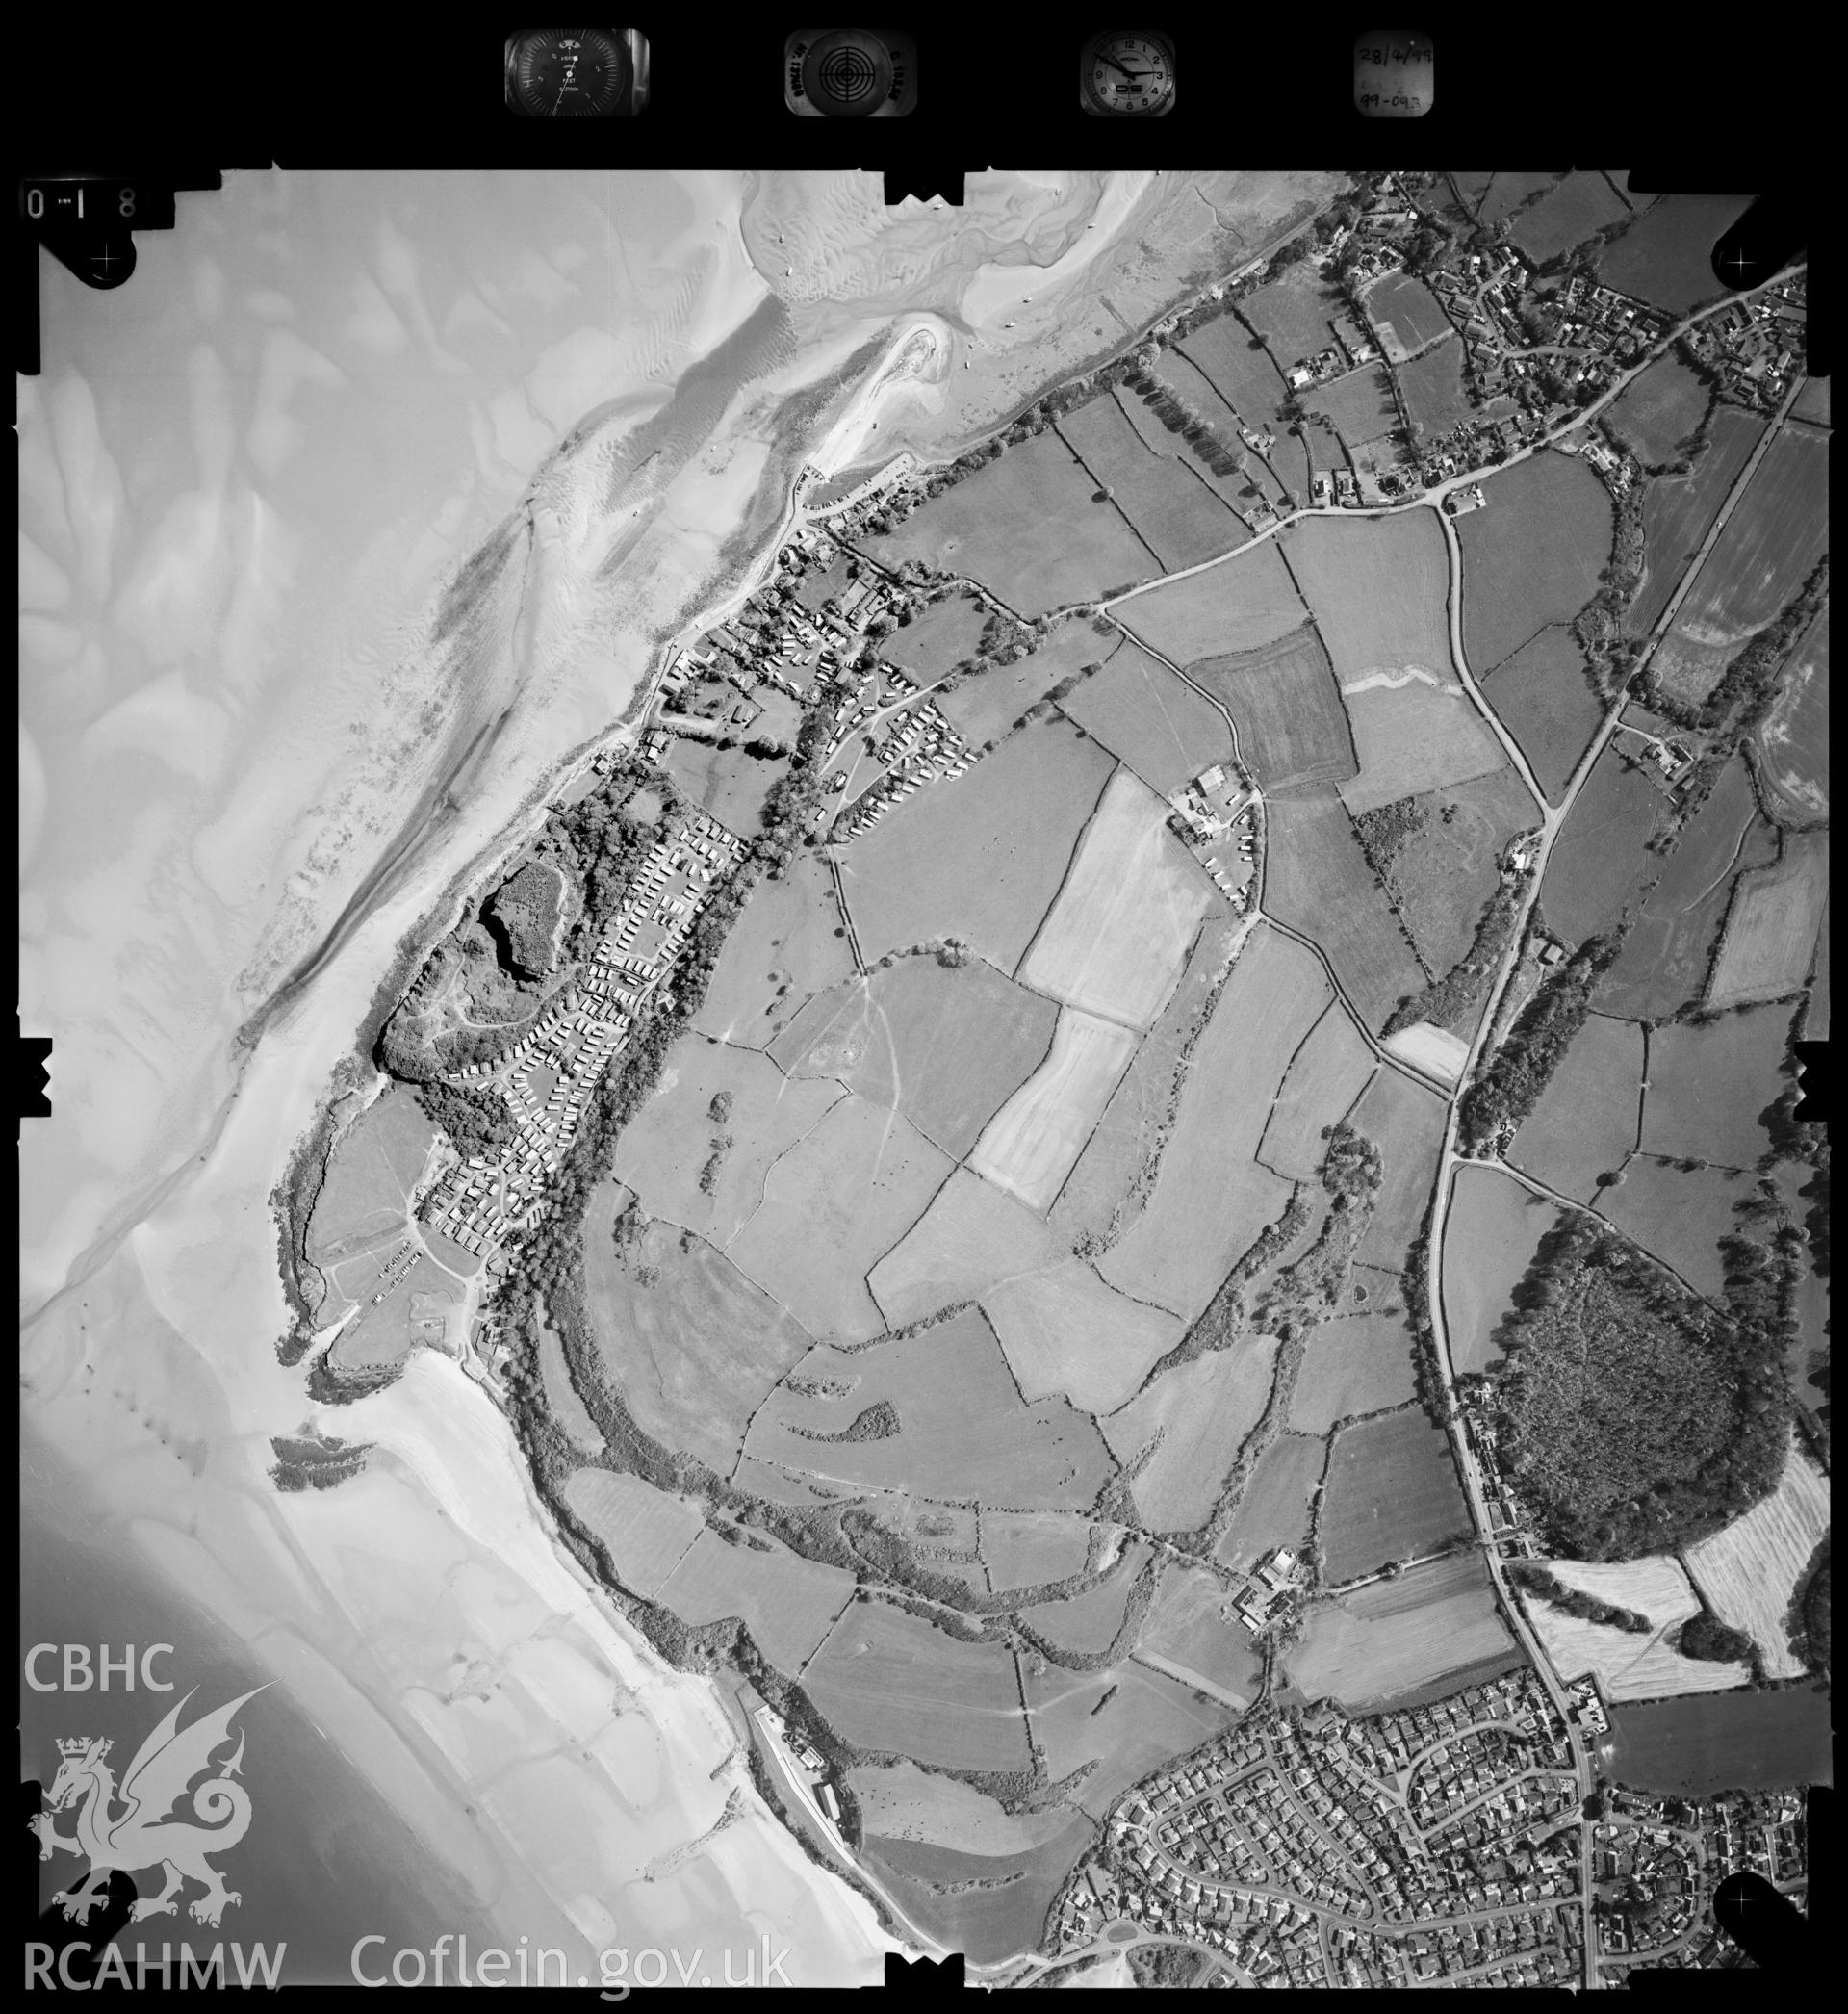 Digitized copy of an aerial photograph showing the Castle Bank area on Anglesey, taken by Ordnance Survey, 1999.